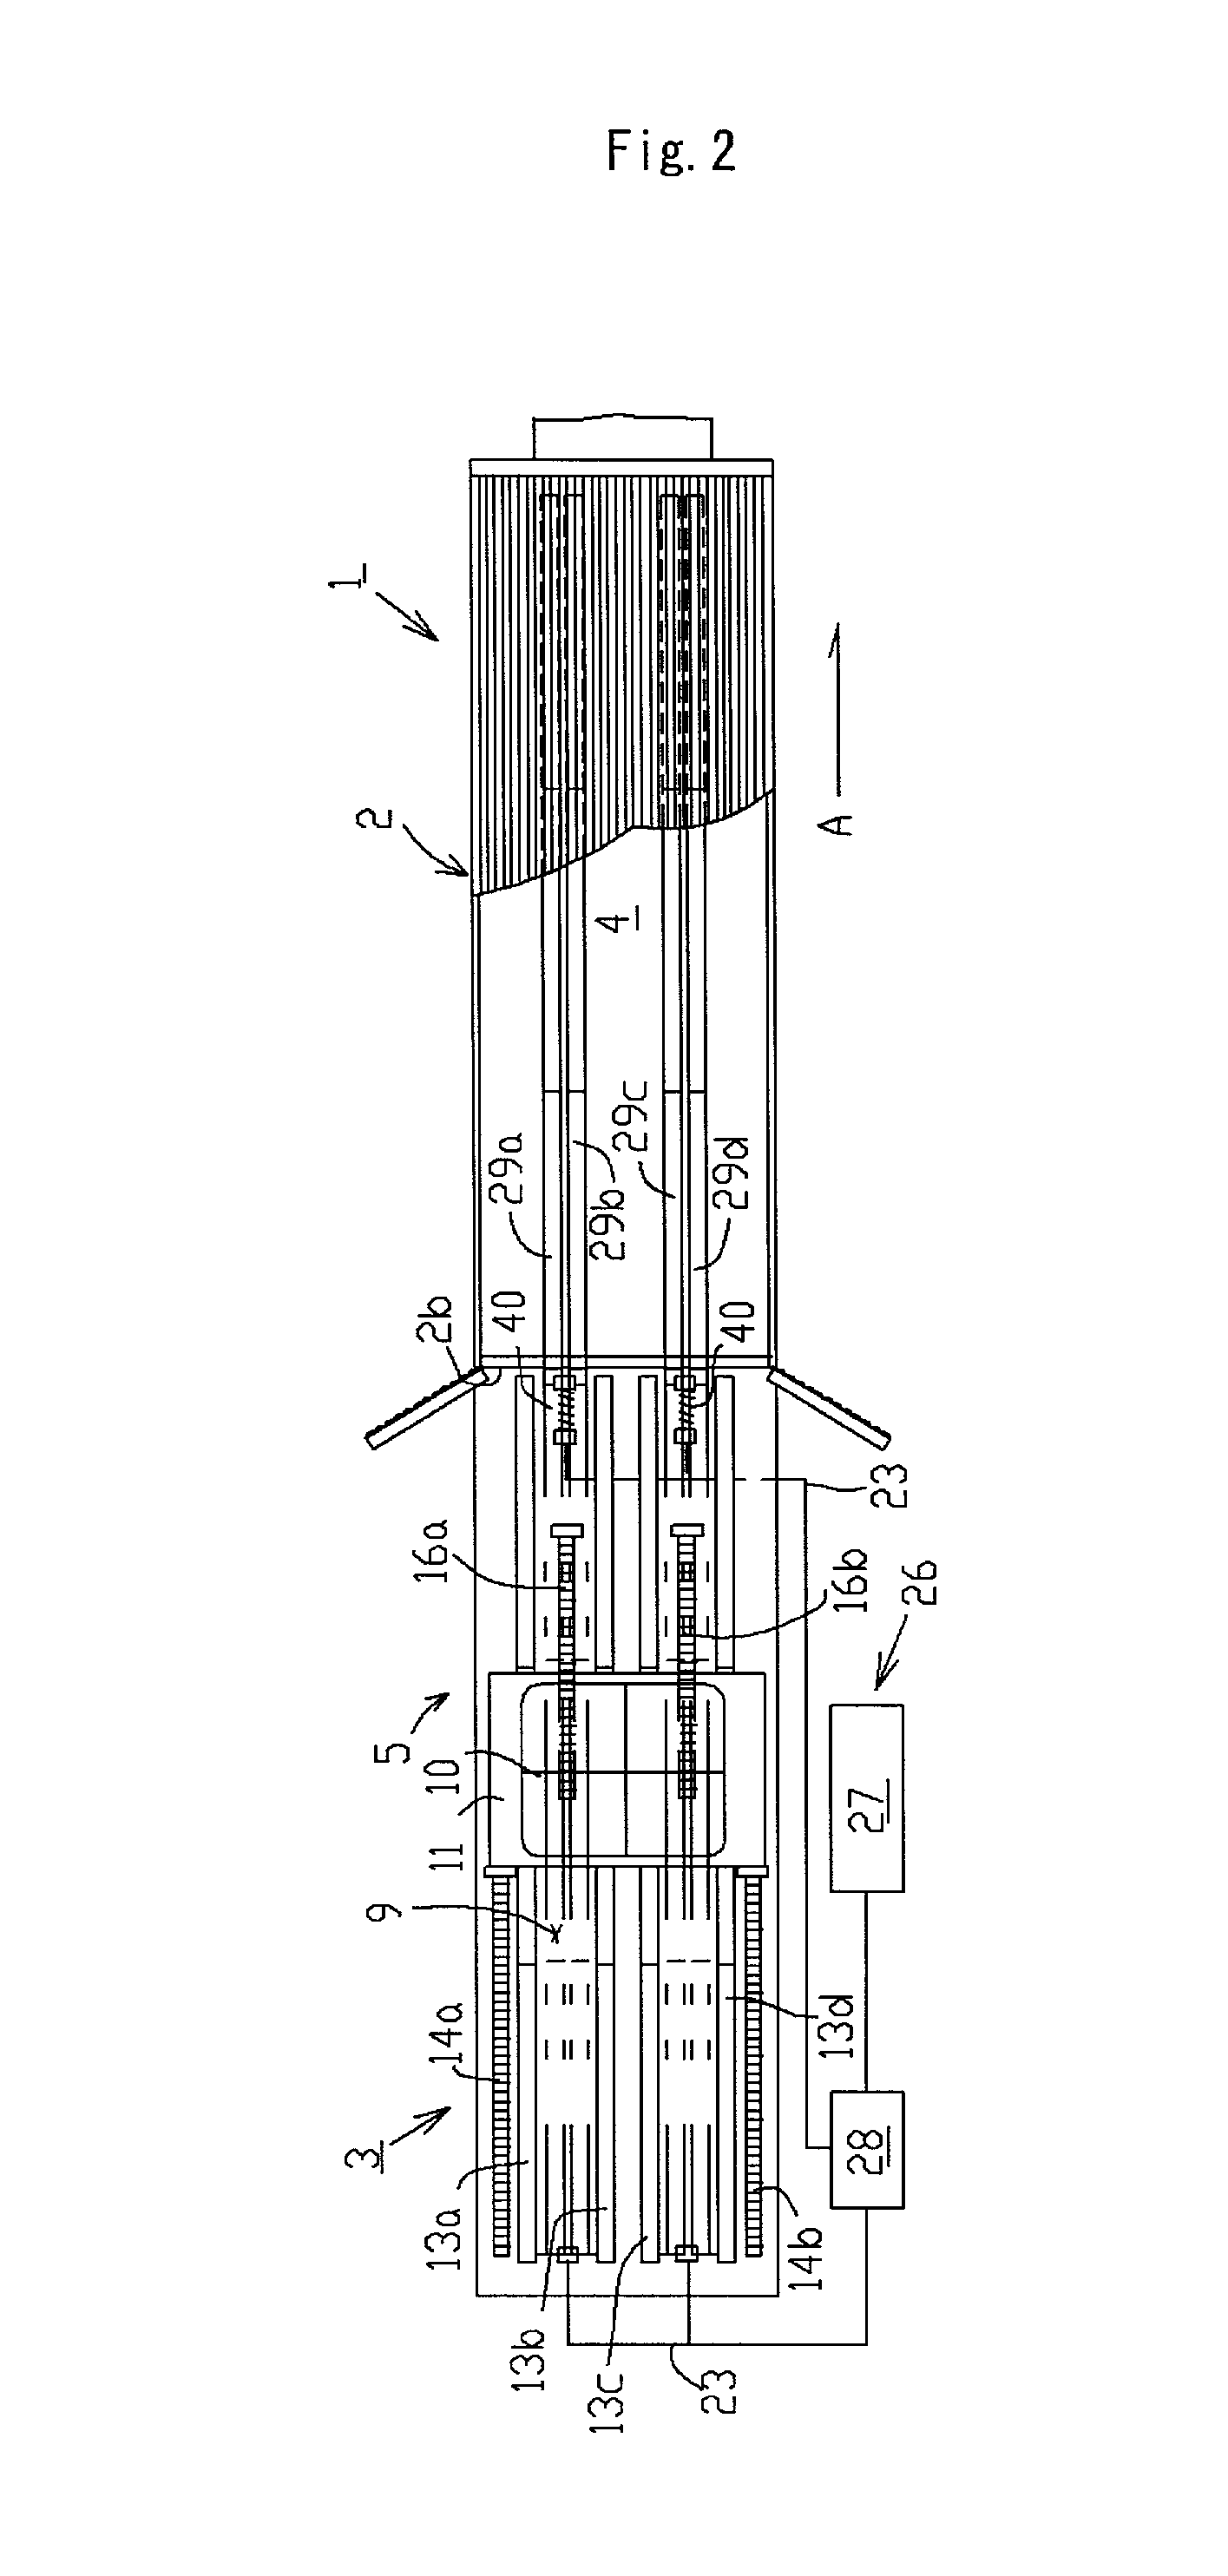 Device for carrying article into and from container, method for introducing and discharging article into and from container, and pallet for carrying article